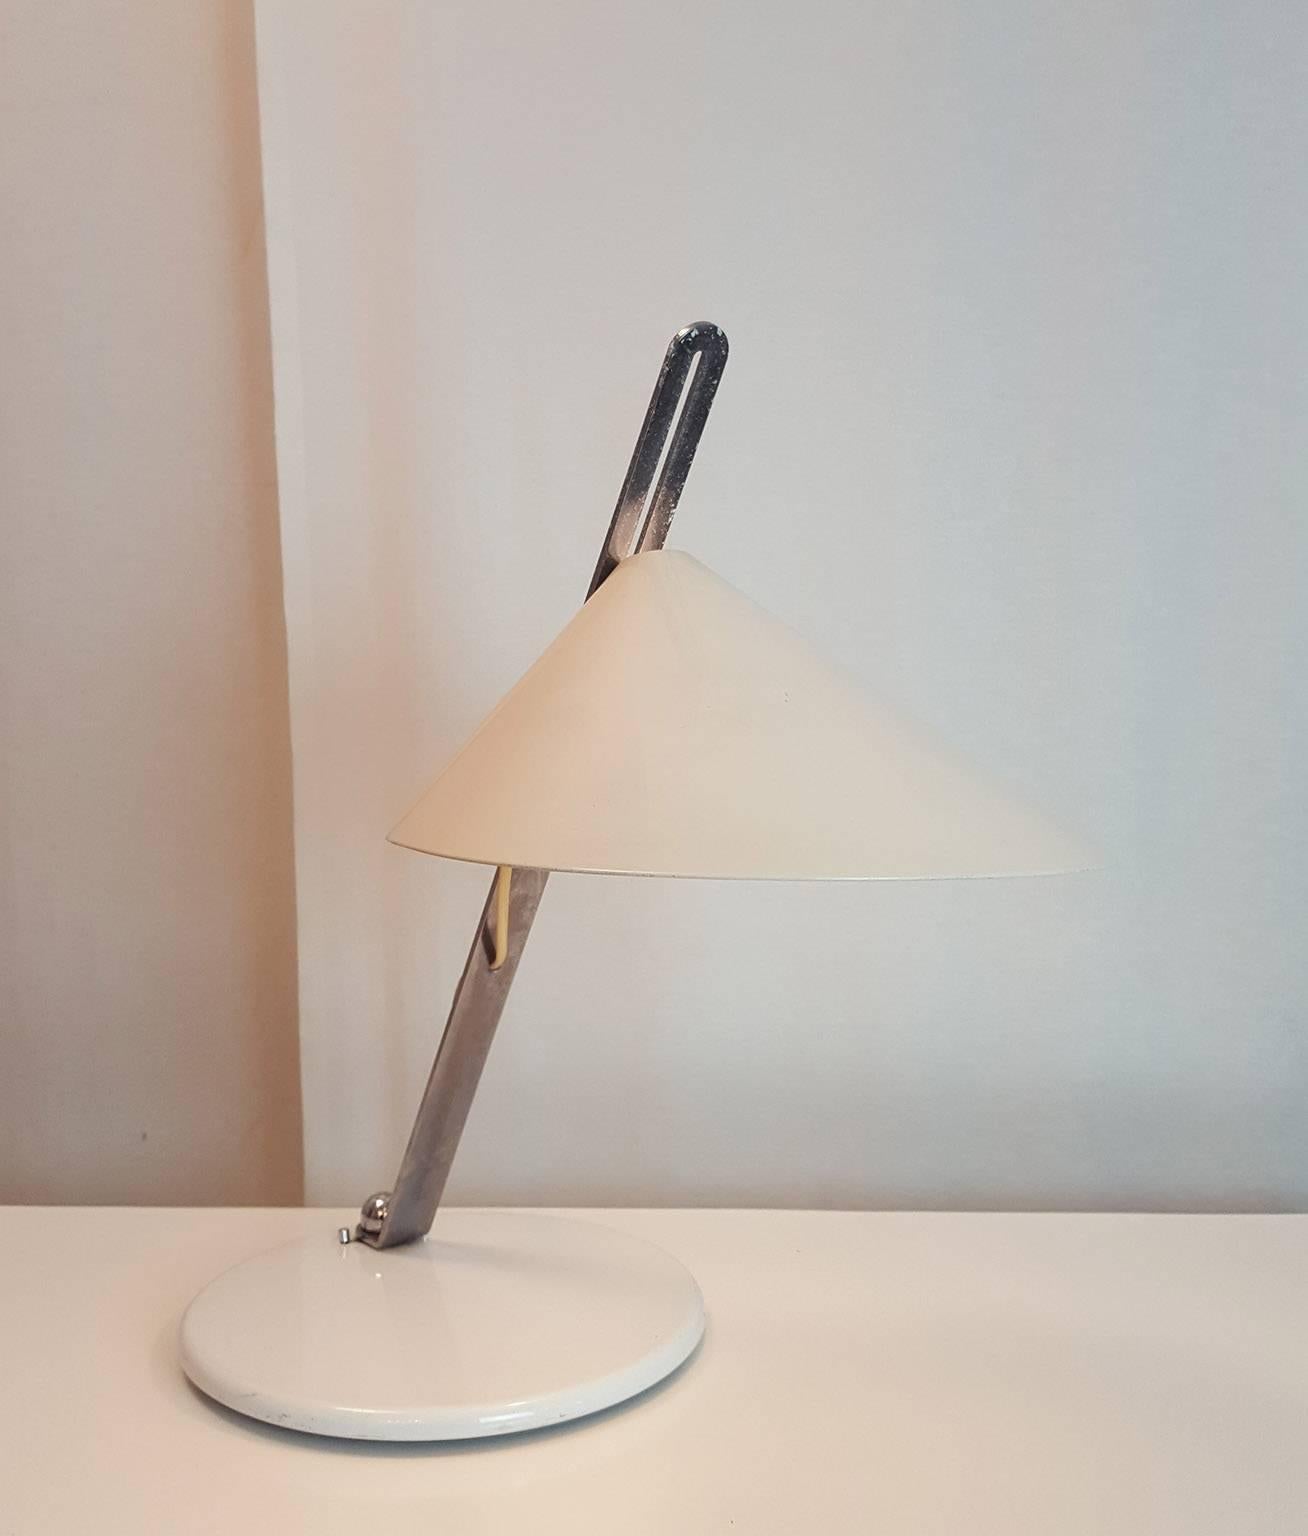 Nice table lamp completely adjustable;
pivoting plastic chromed arm on lacquered metal basement: white lacquered metal reflector that goes up and down on the arm.
Good original condition.